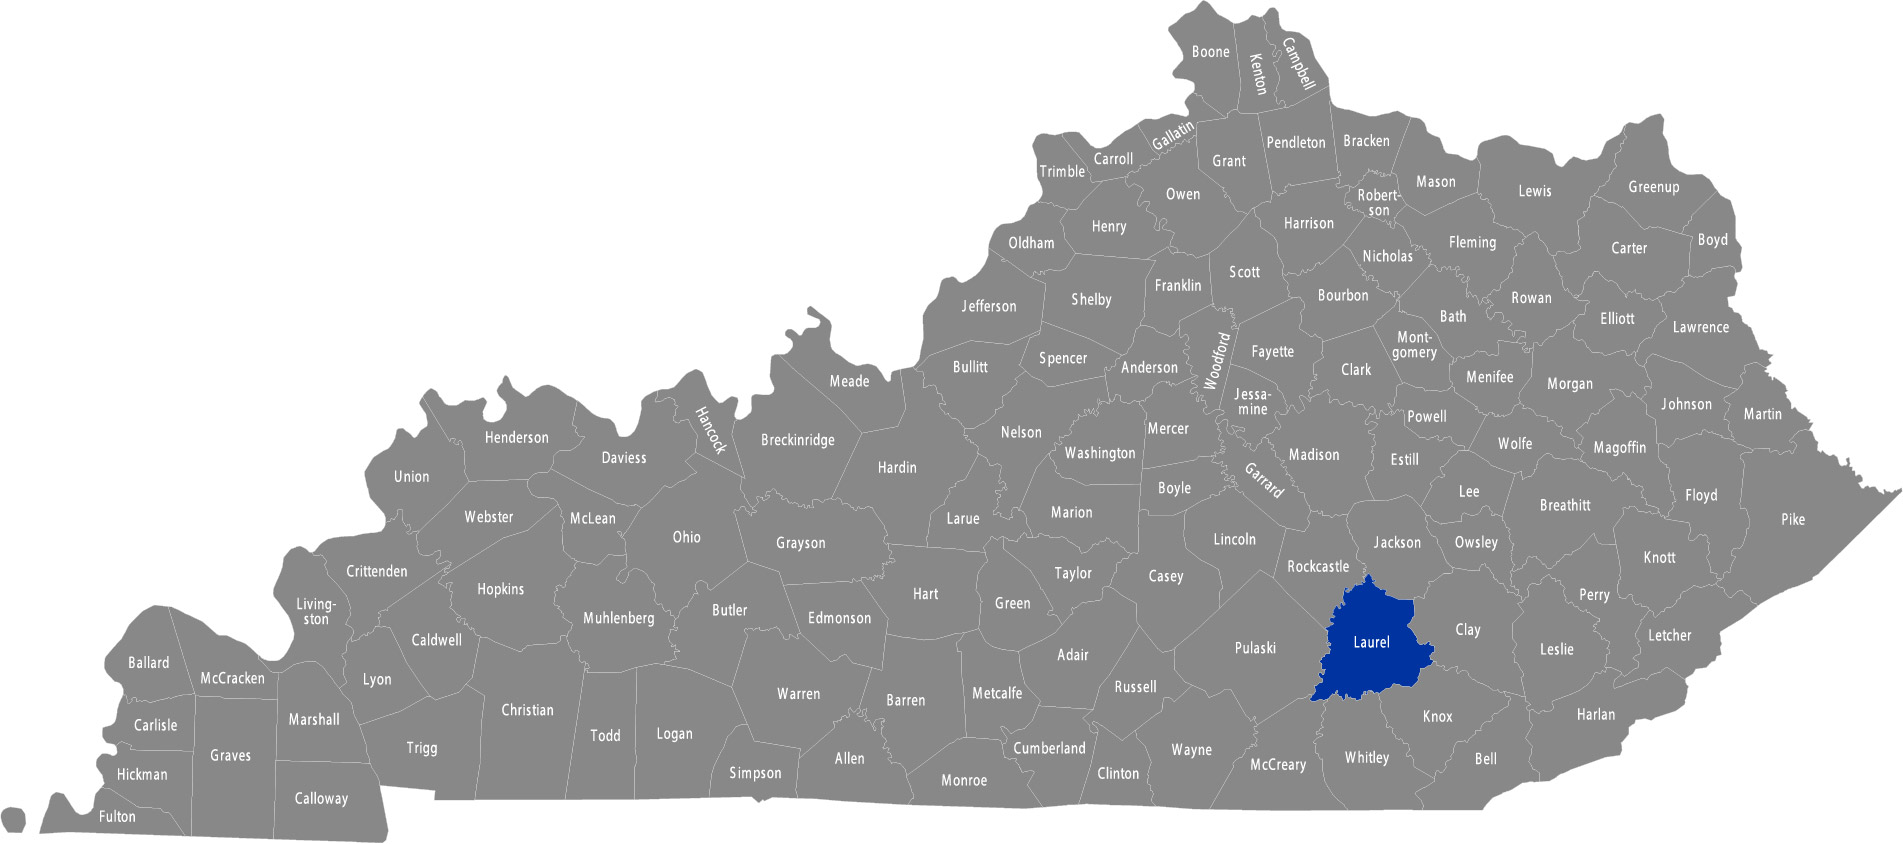 Kentucky map with laurel county highlighted in blue